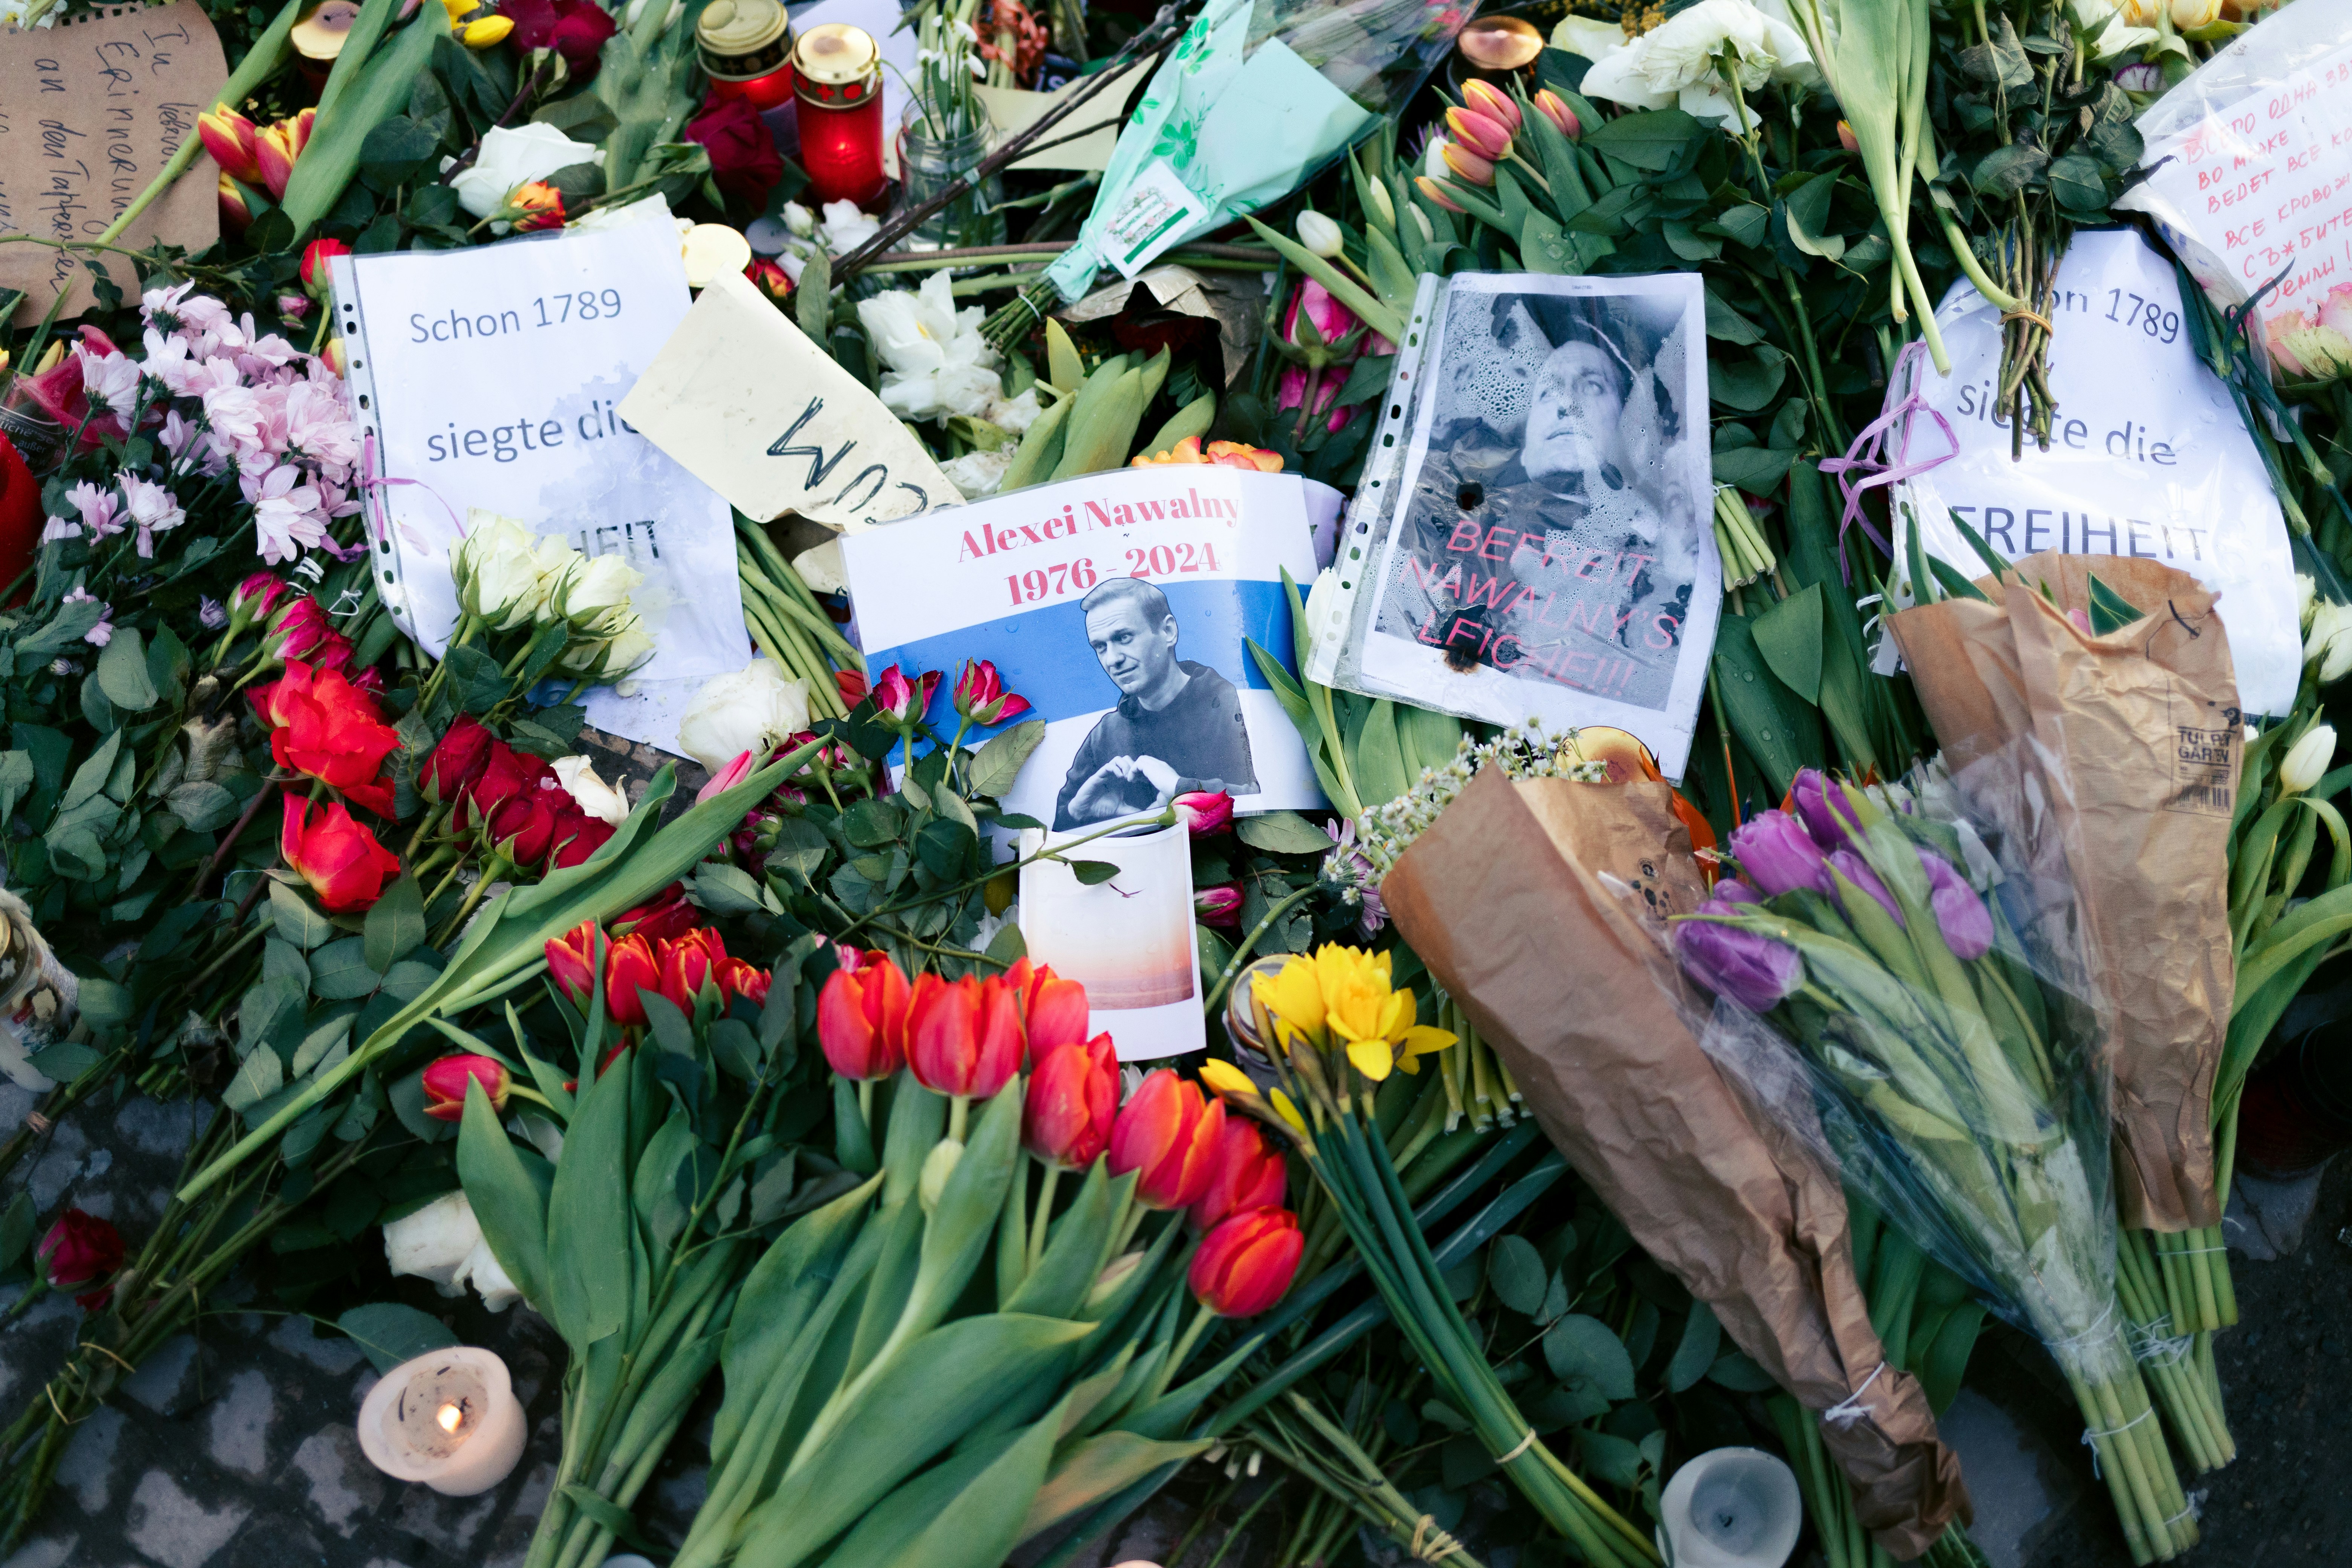 Flowers and notes of condolence for Alexander Navalny lie in a pile.